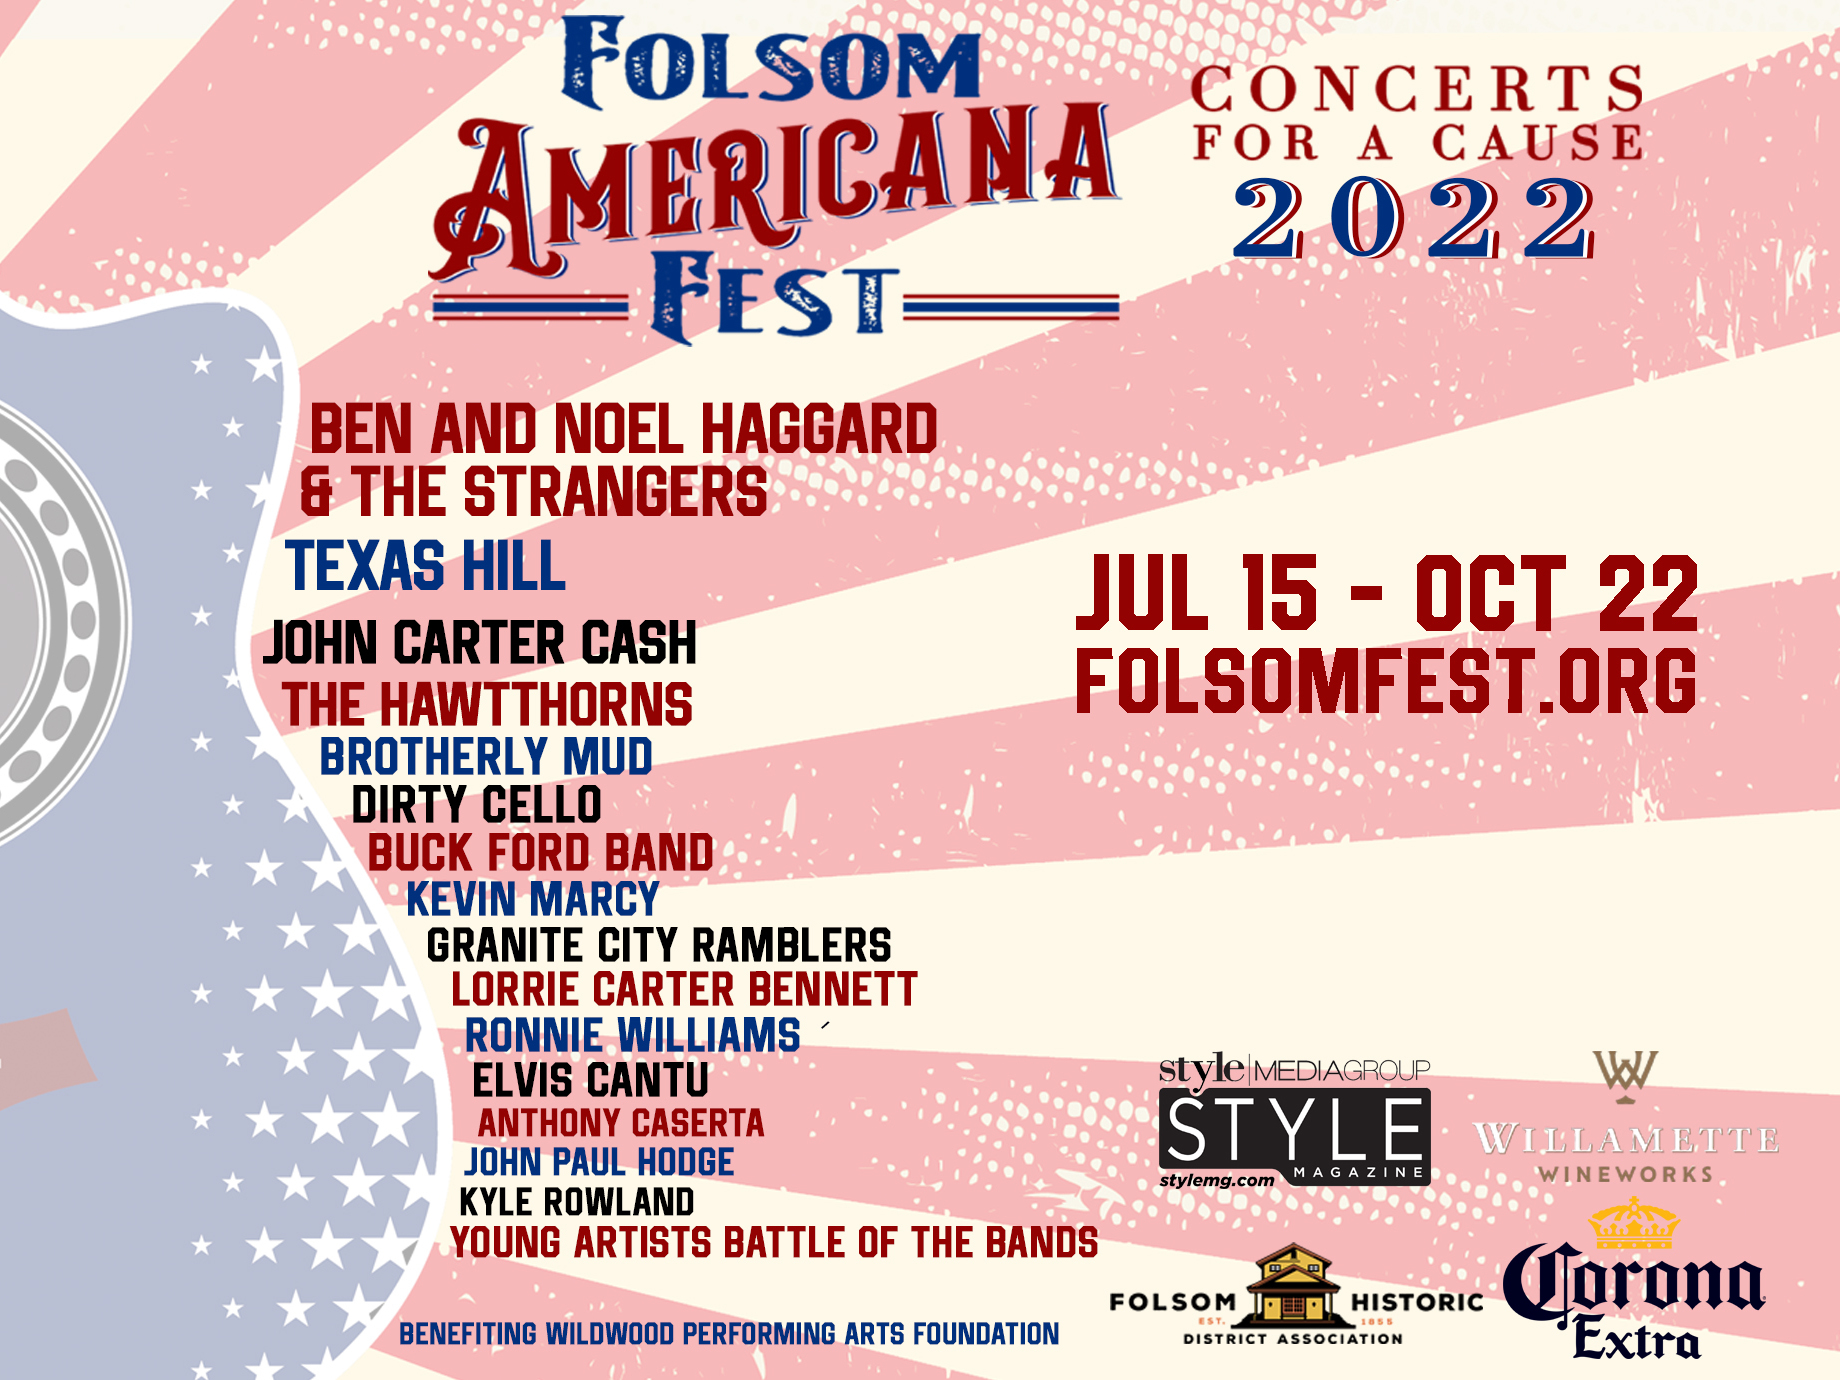 Folsom Americana Fest Concerts in Folsom Savings and Entertainment